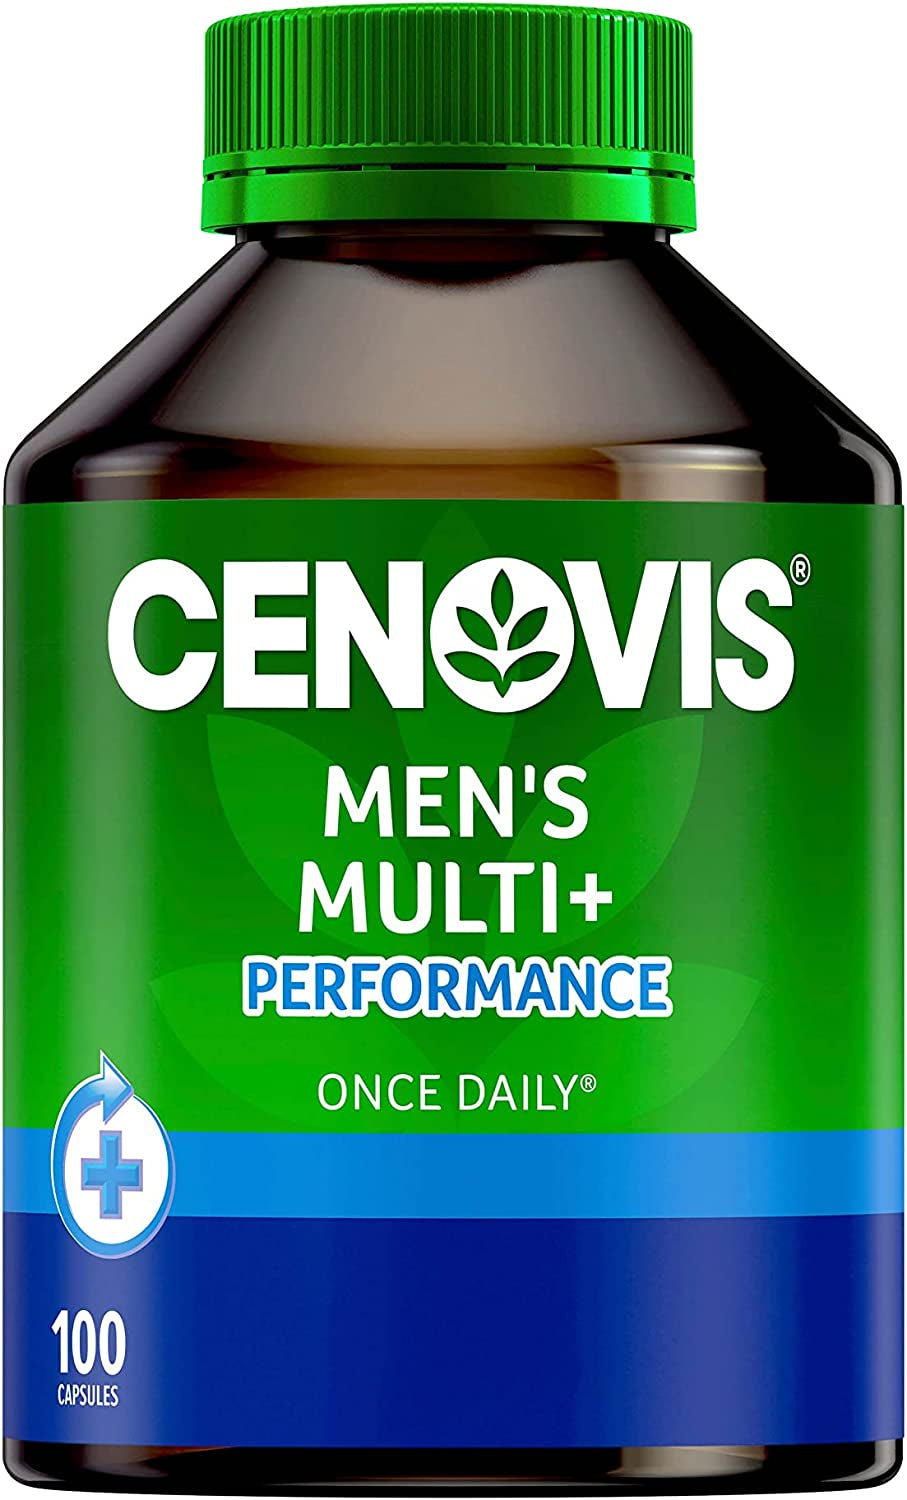 Men’S Multivitamin + Performance - Supports Mental Function and Physical Stamina - Relieves Fatigue, Multi Vitamin 100 Capsules